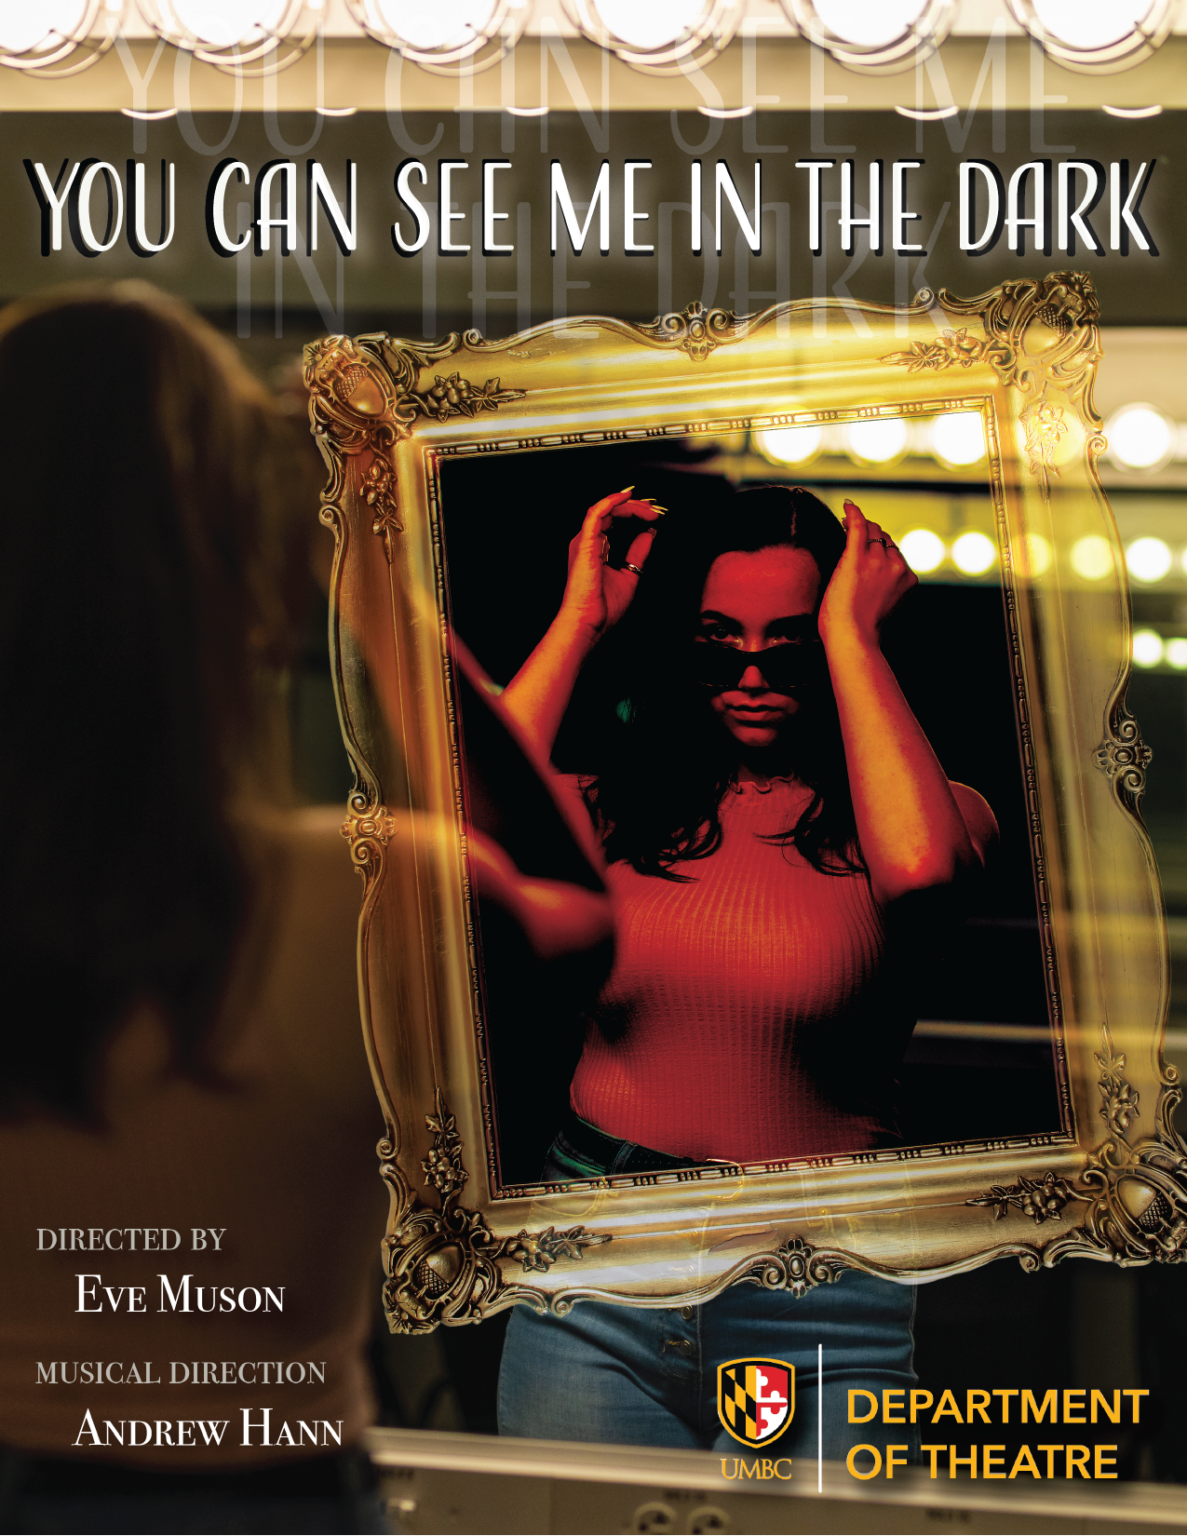 A white woman with dark glasses looks into a mirror, and we see the words "You can see me in the dark".